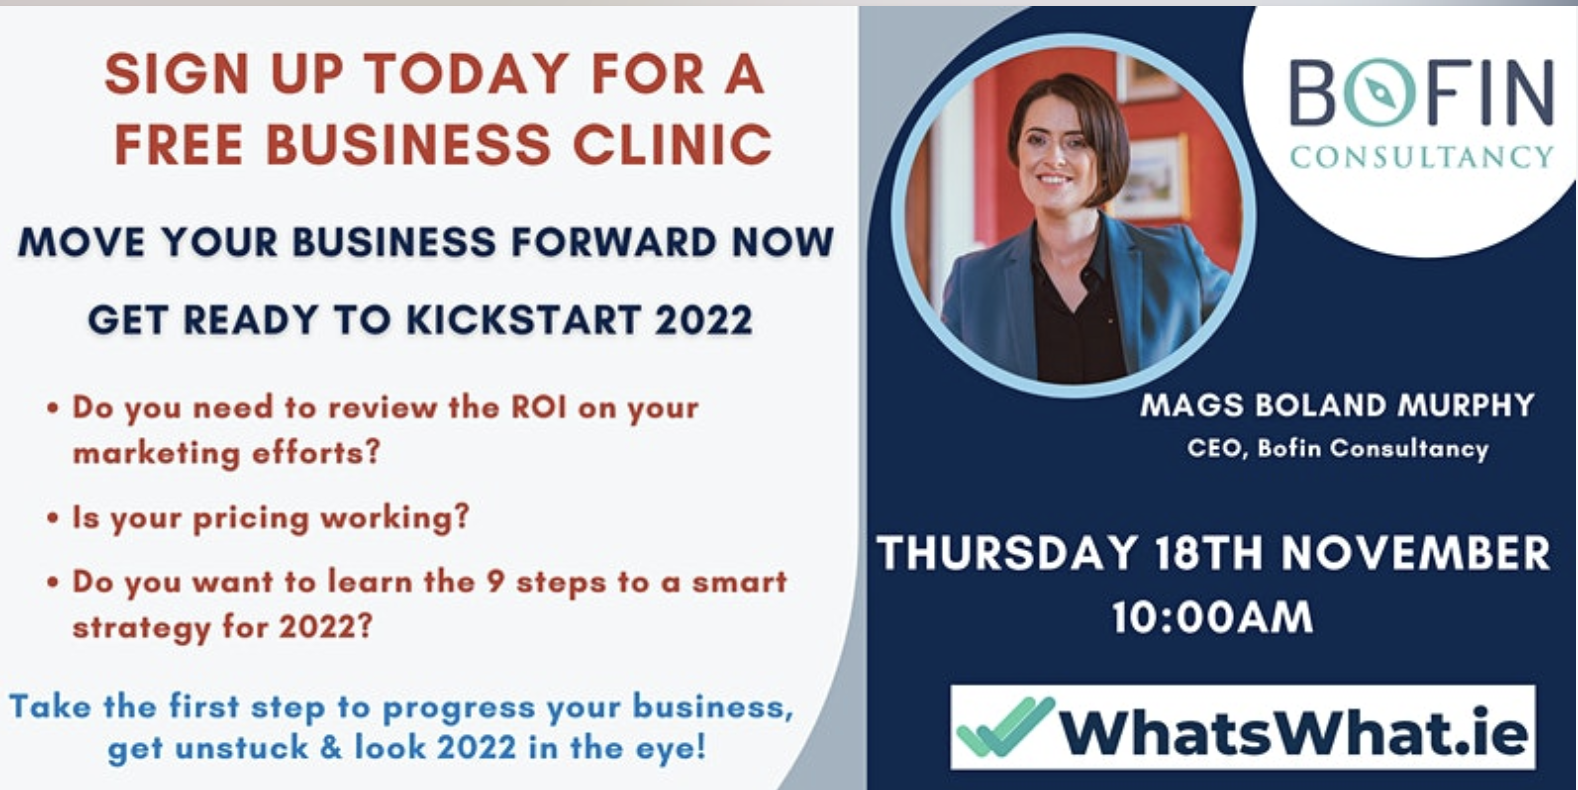 The Business Clinic with Mags Boland Murphy from Bofin Consultancy